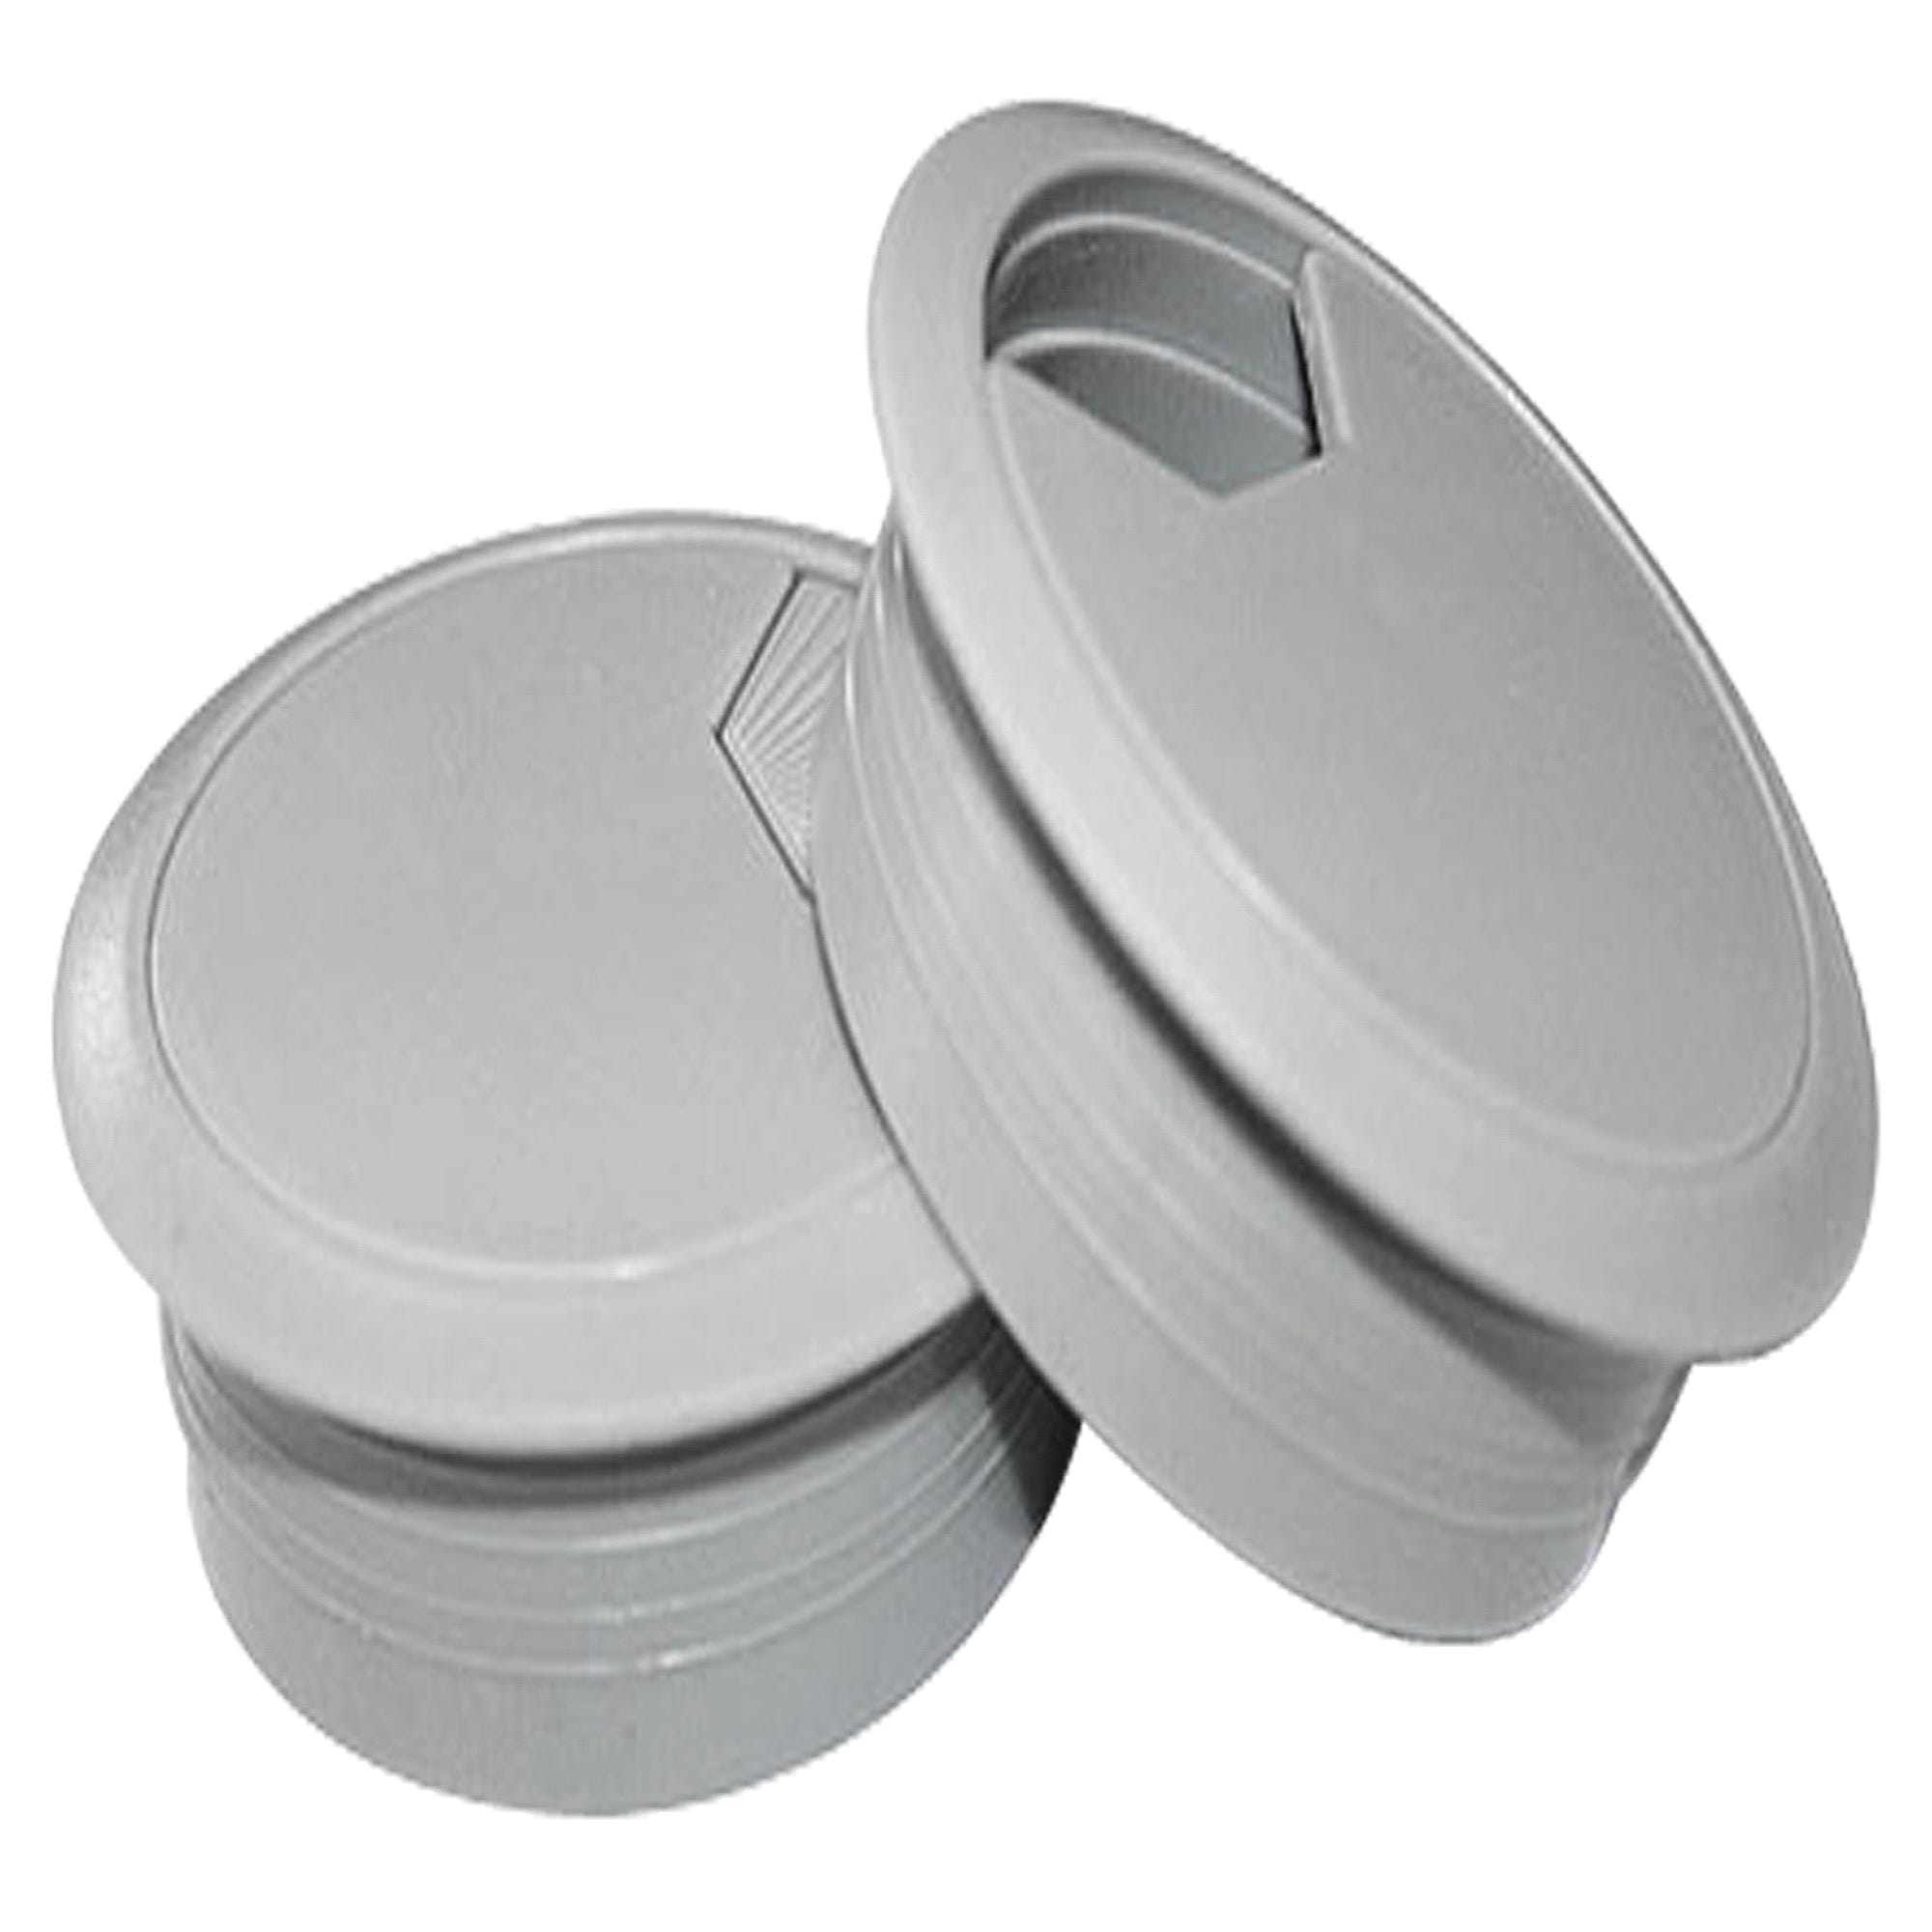 TAPA PASACABLES EMUCA 60MM PLASTICO GRIS